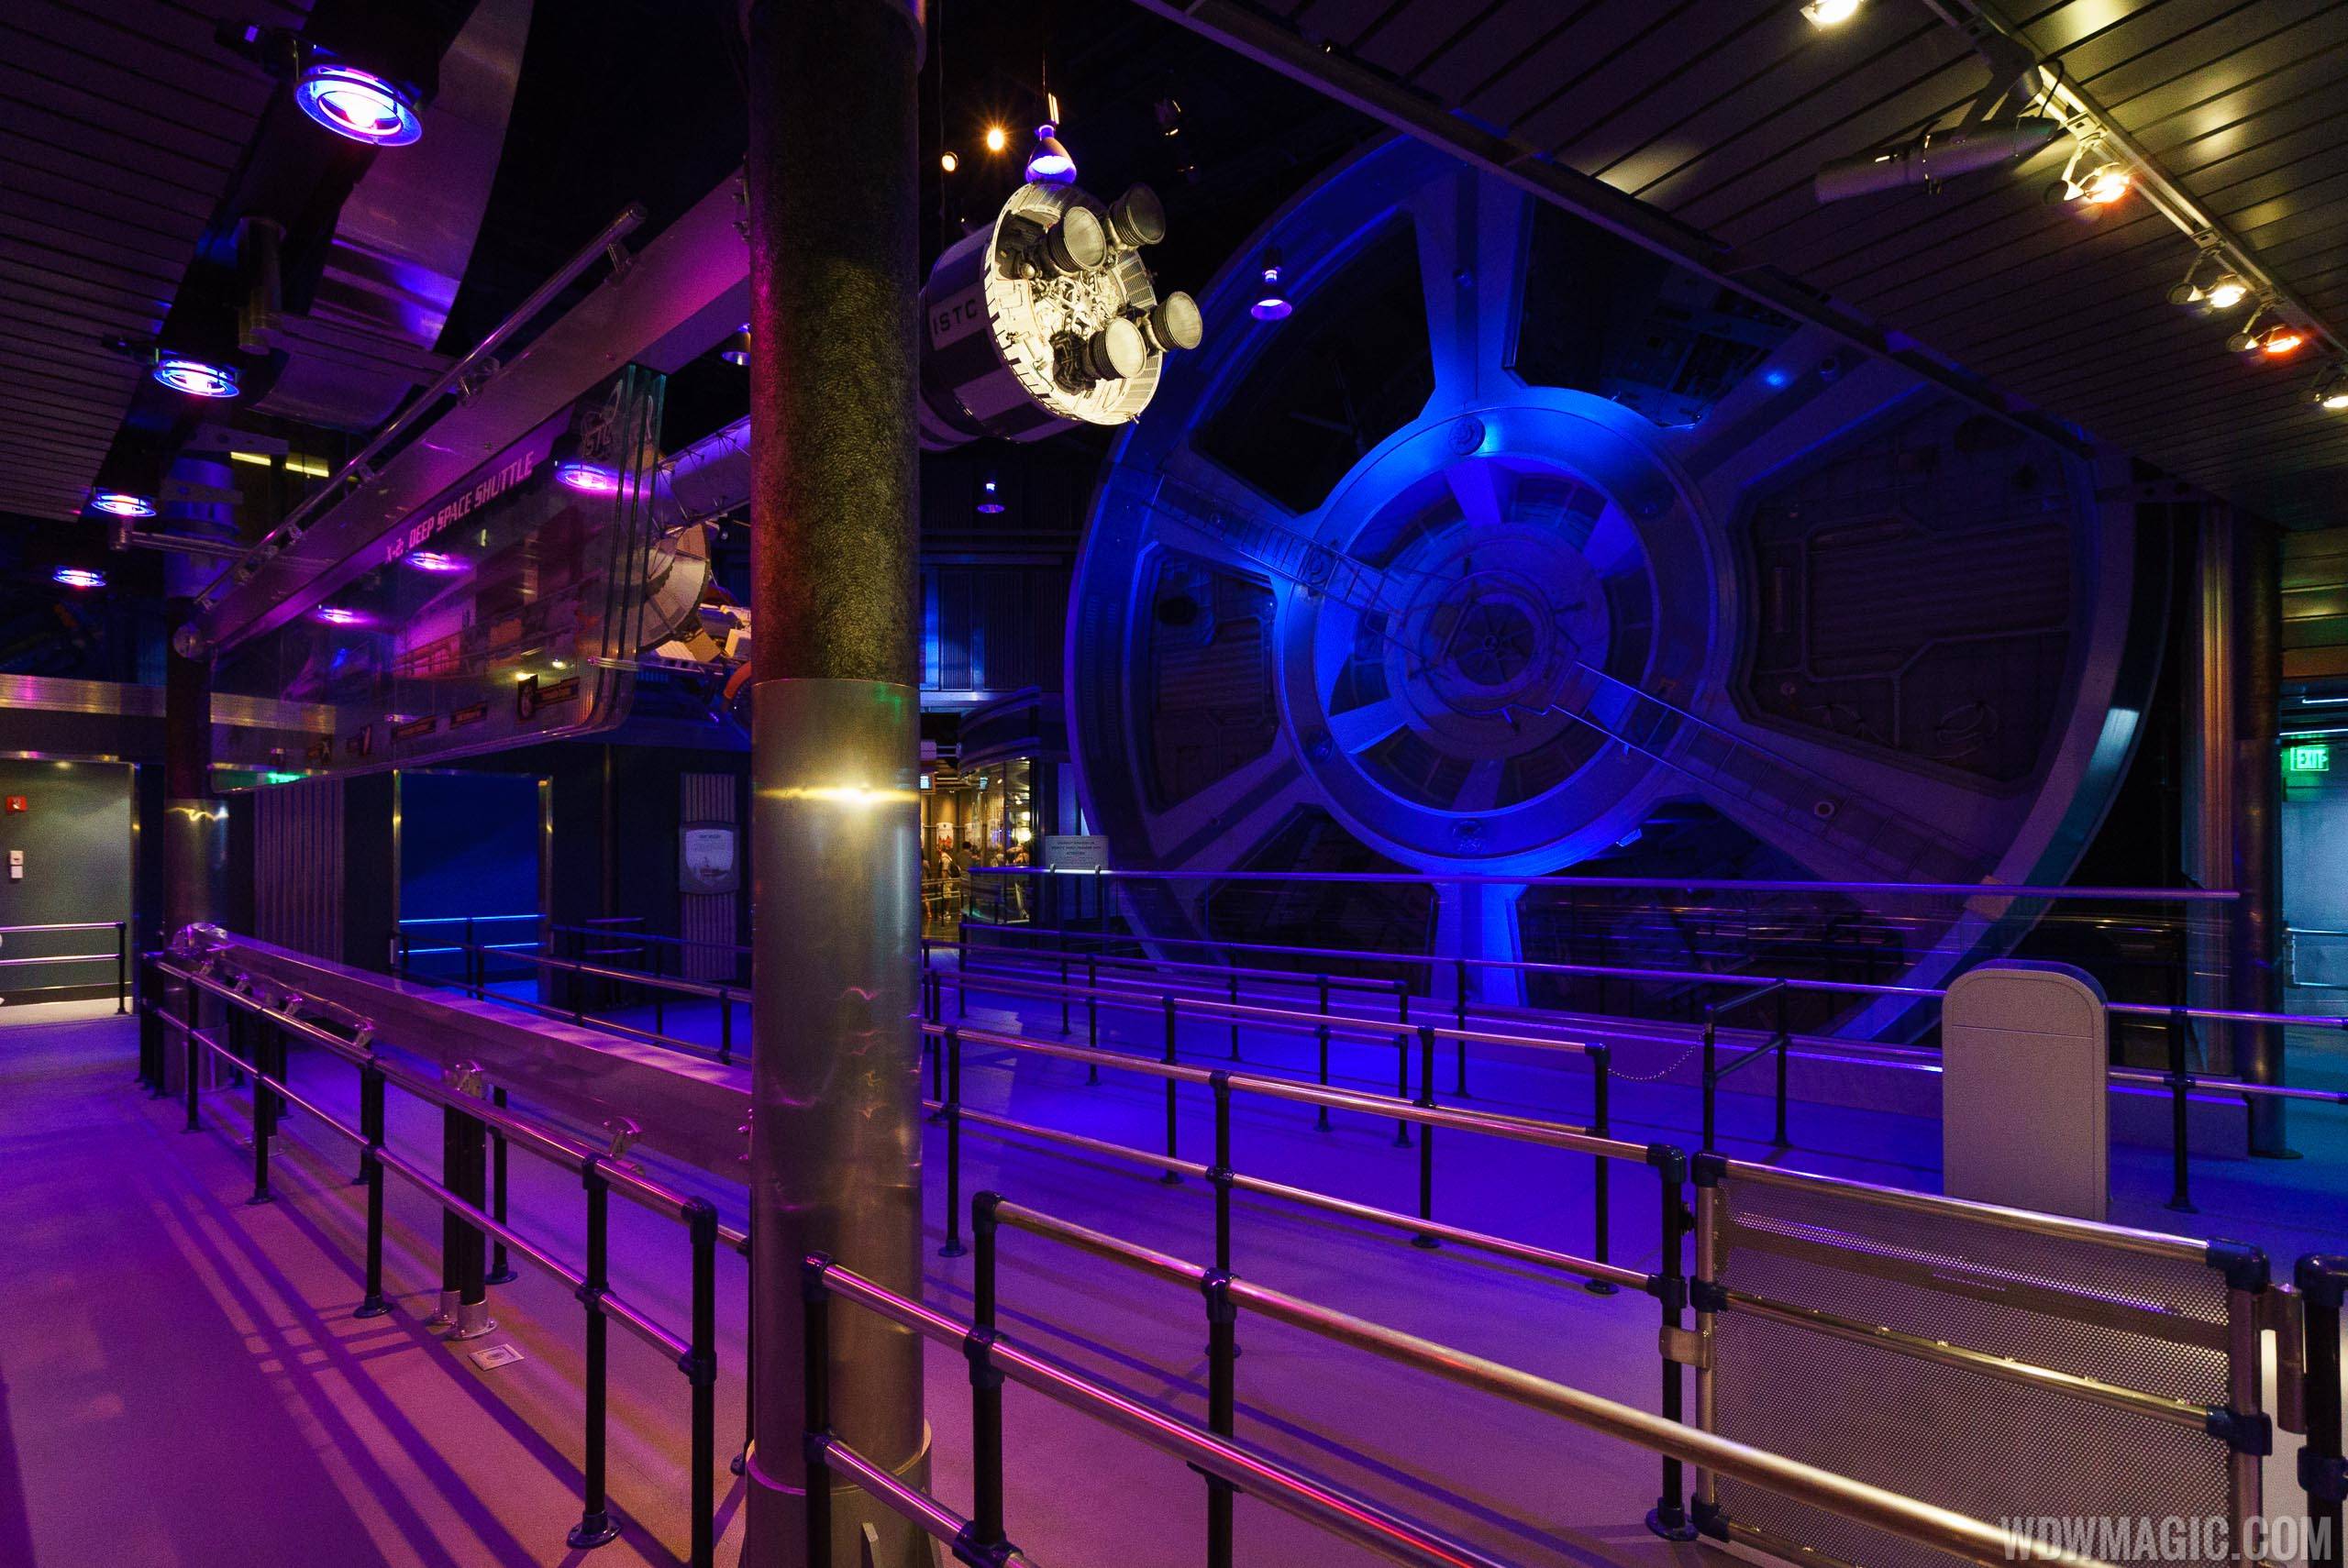 Mission SPACE queue area - the gravity wheel was not repaired and does not rotate